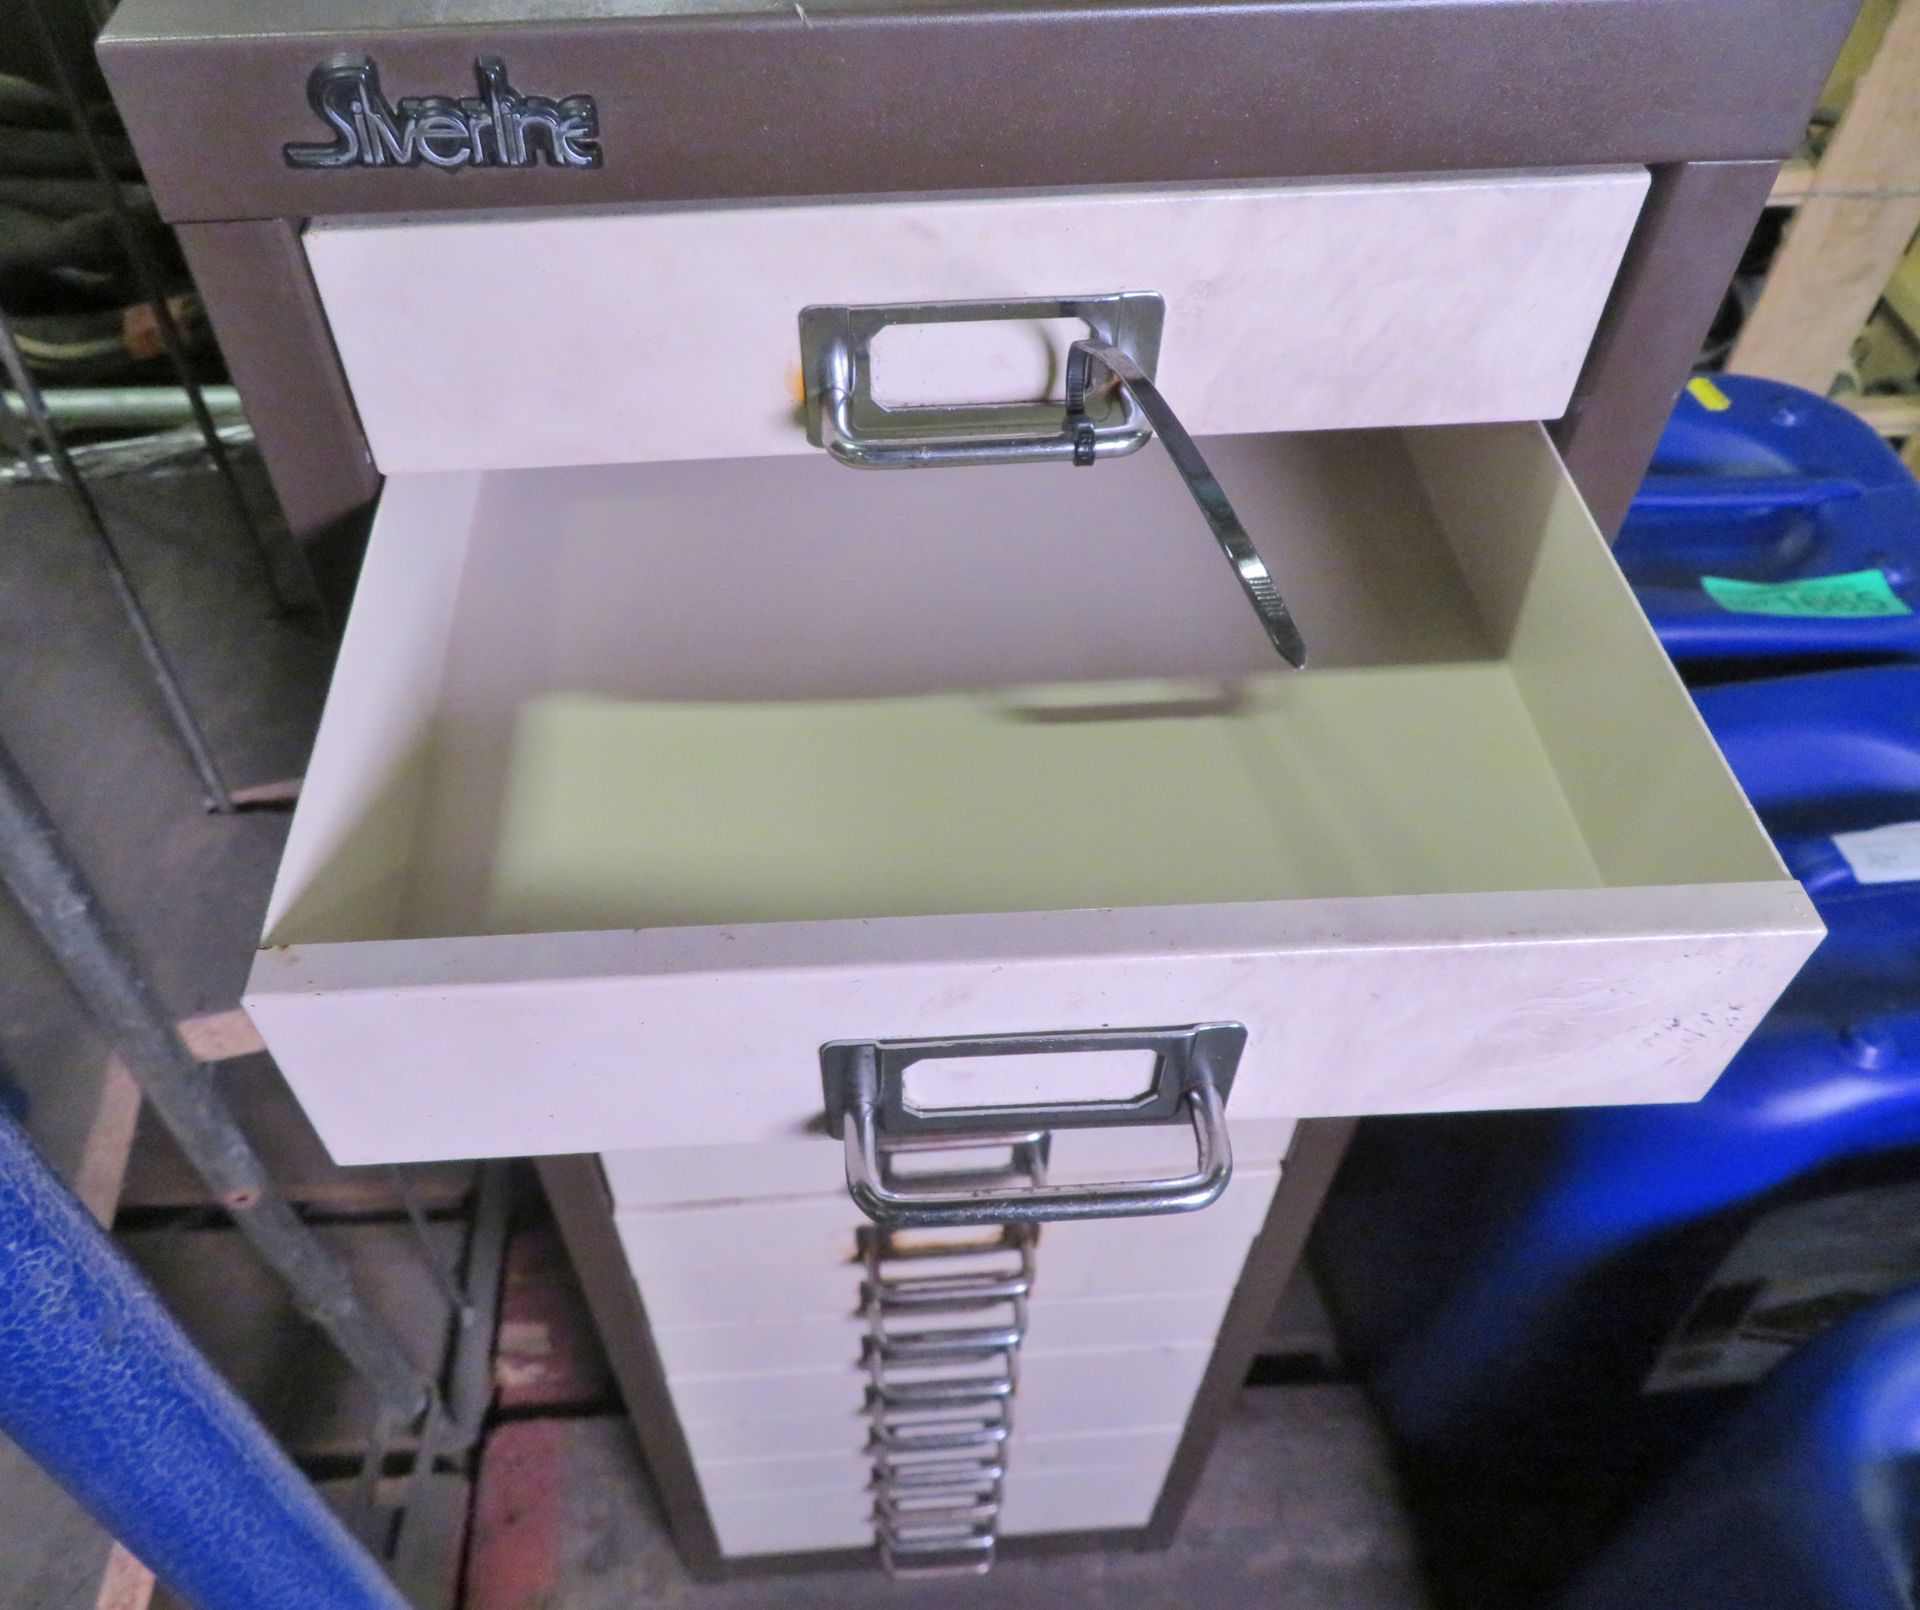 Silverline filing drawer cabinet - L280 x D410 x H865mm - Image 2 of 2